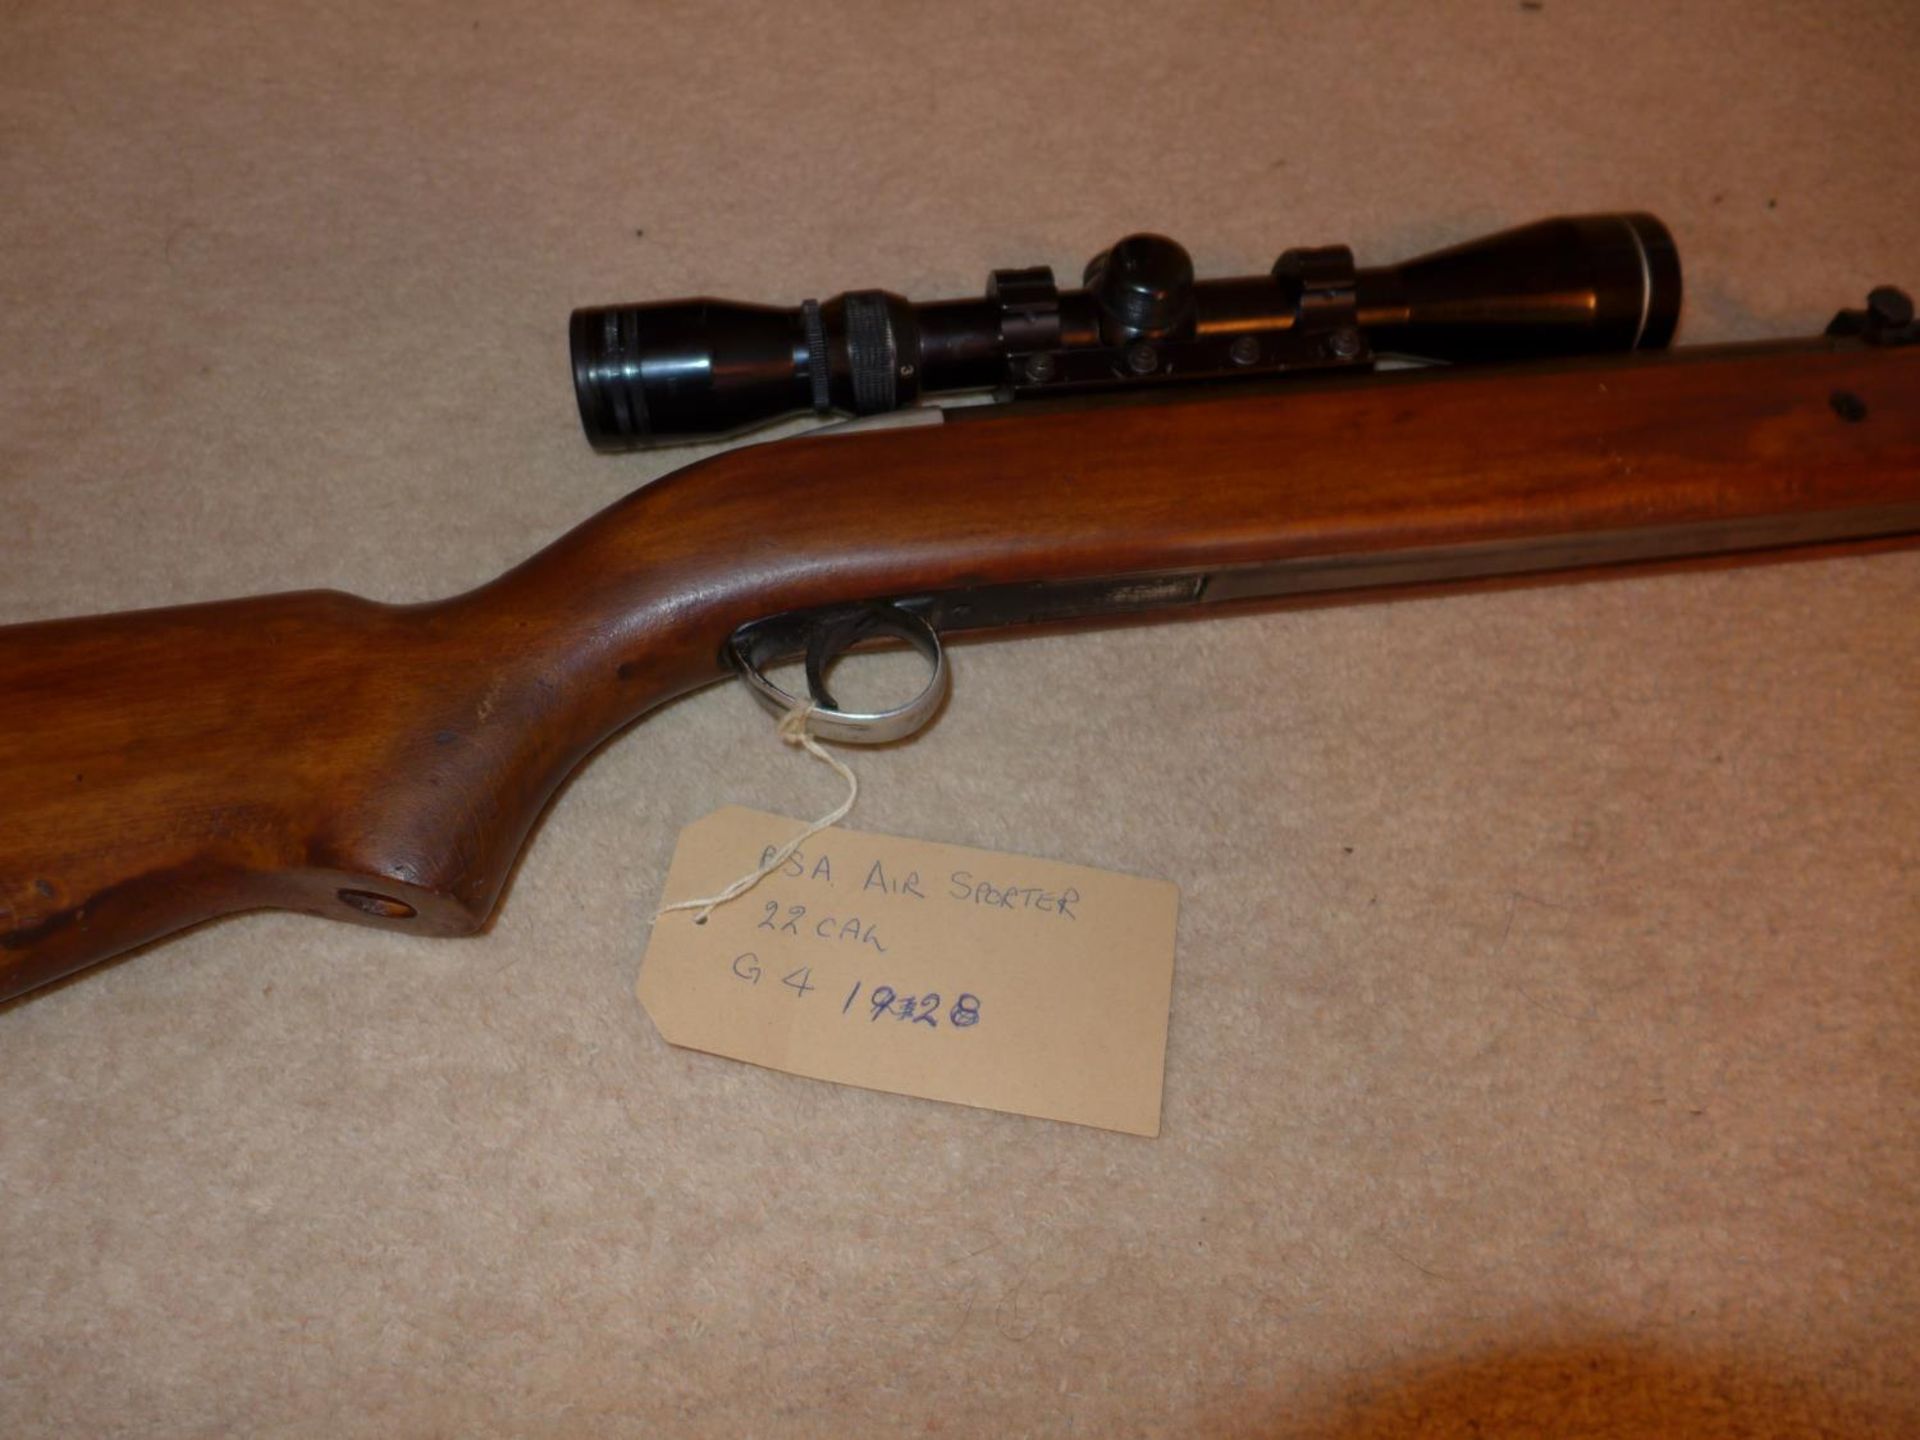 A B.S.A. .22 CALIBRE AIR SPORTER AIR RIFLE, 46CM BARREL, FITTED TASCO PRONGHORN TELESCOPIC SIGHTS - Image 3 of 4